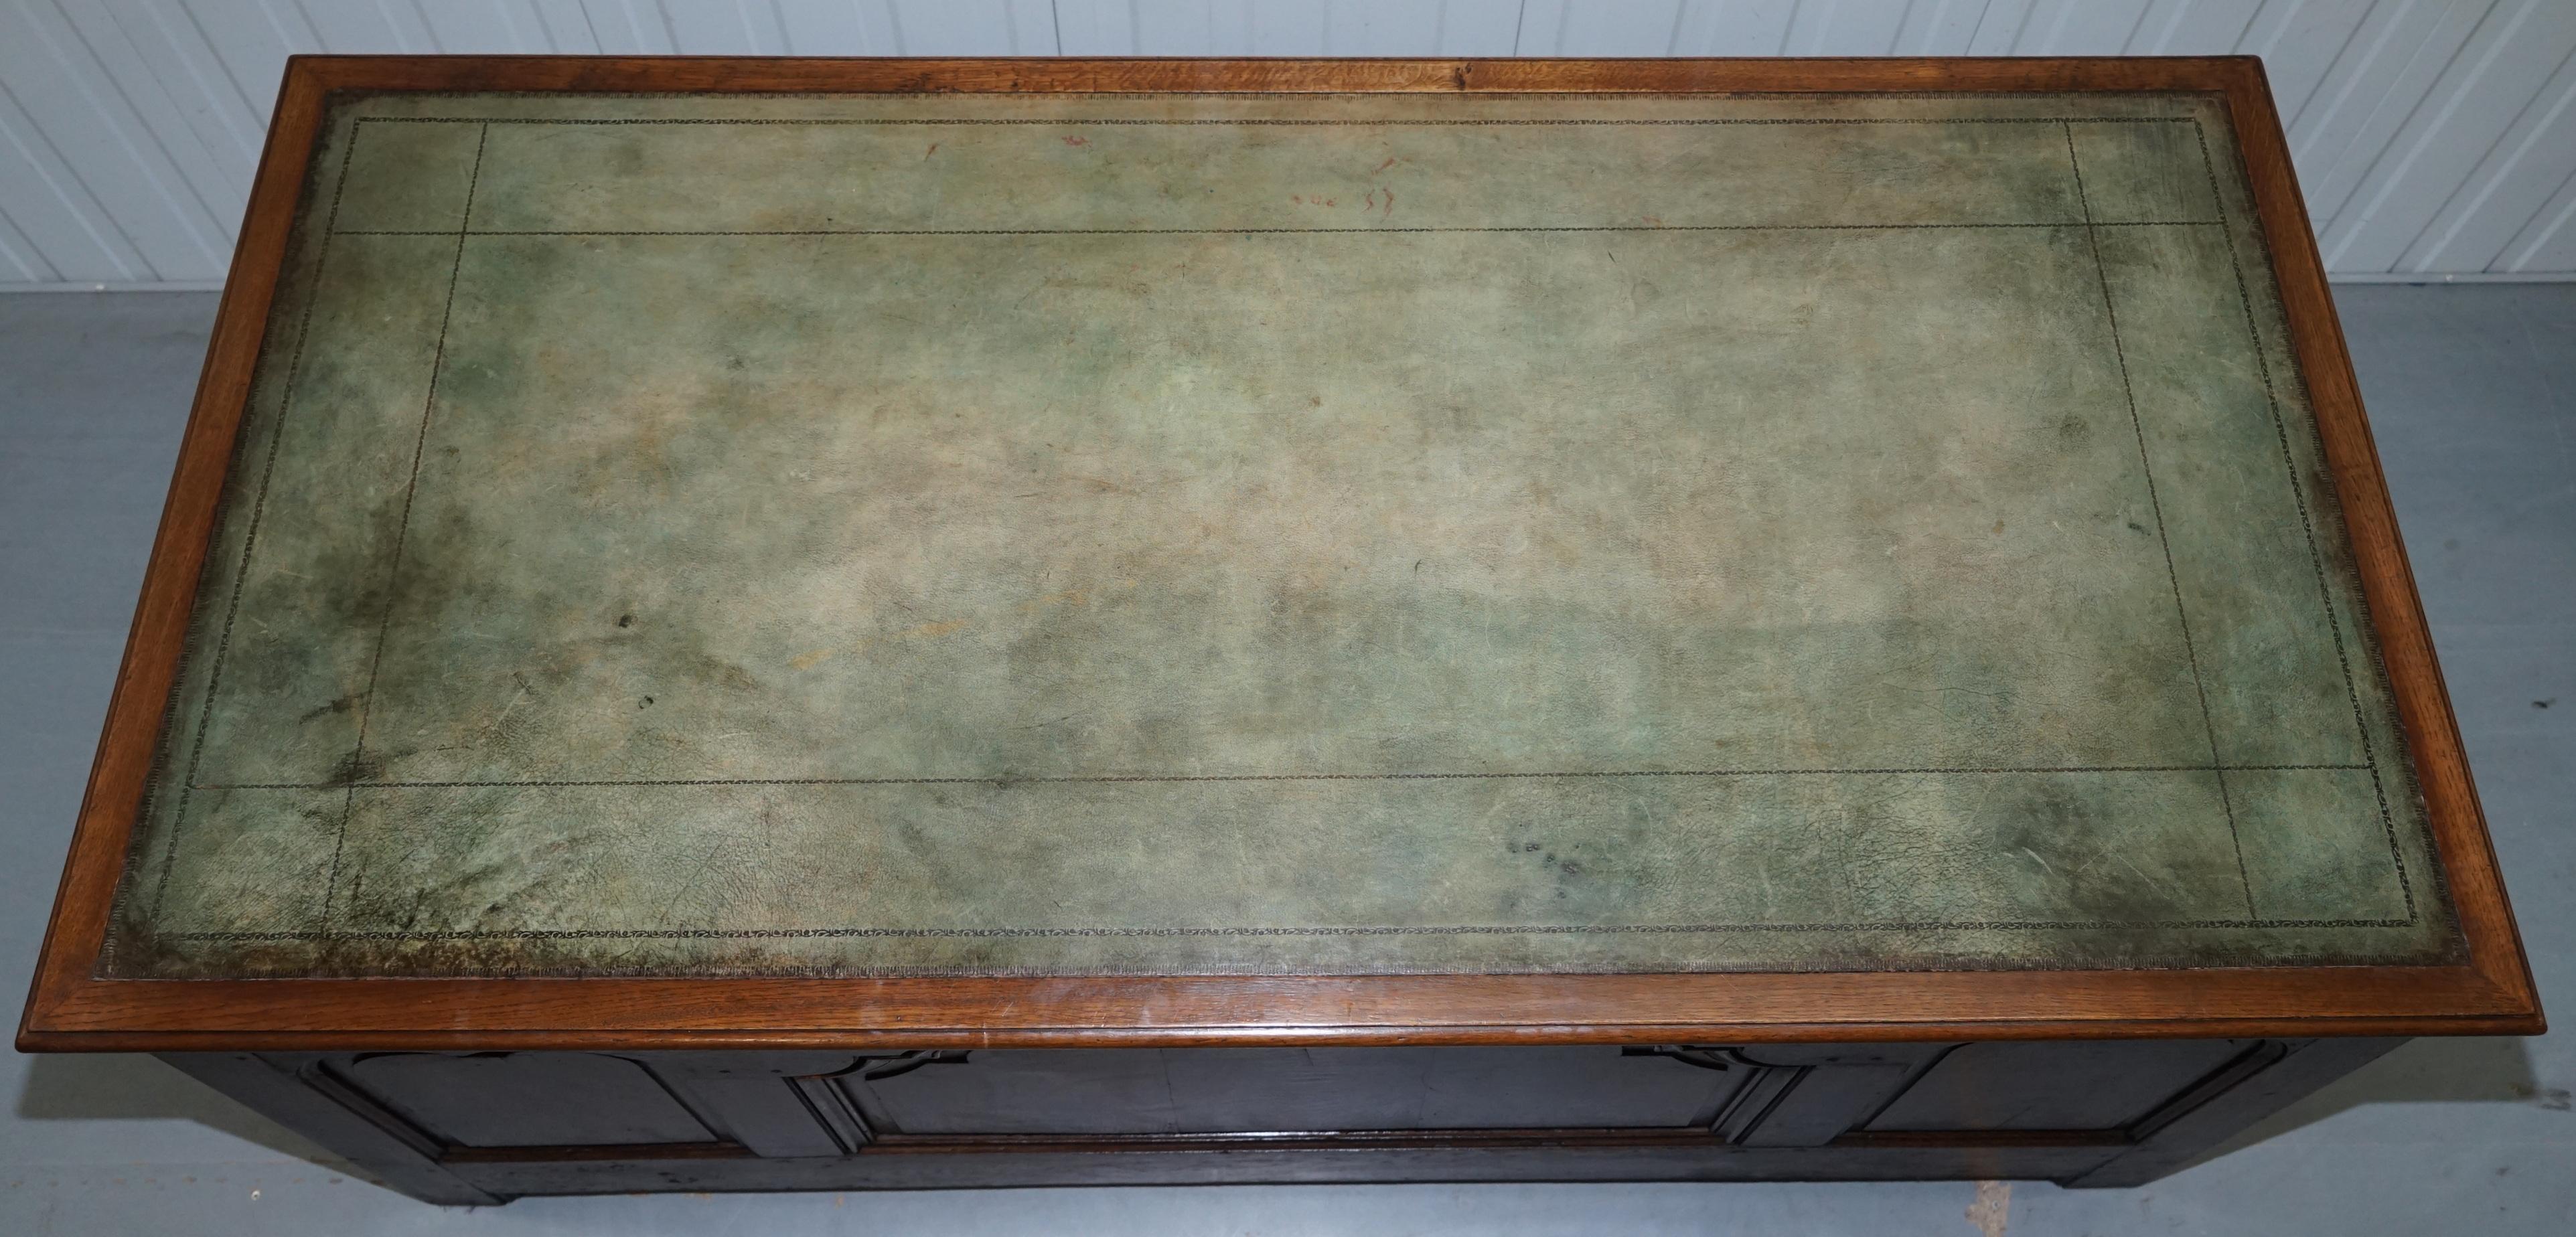 Stunning circa 1900 Oak & Green Leather Topped Desk or Shops Counter Arts Crafts 4